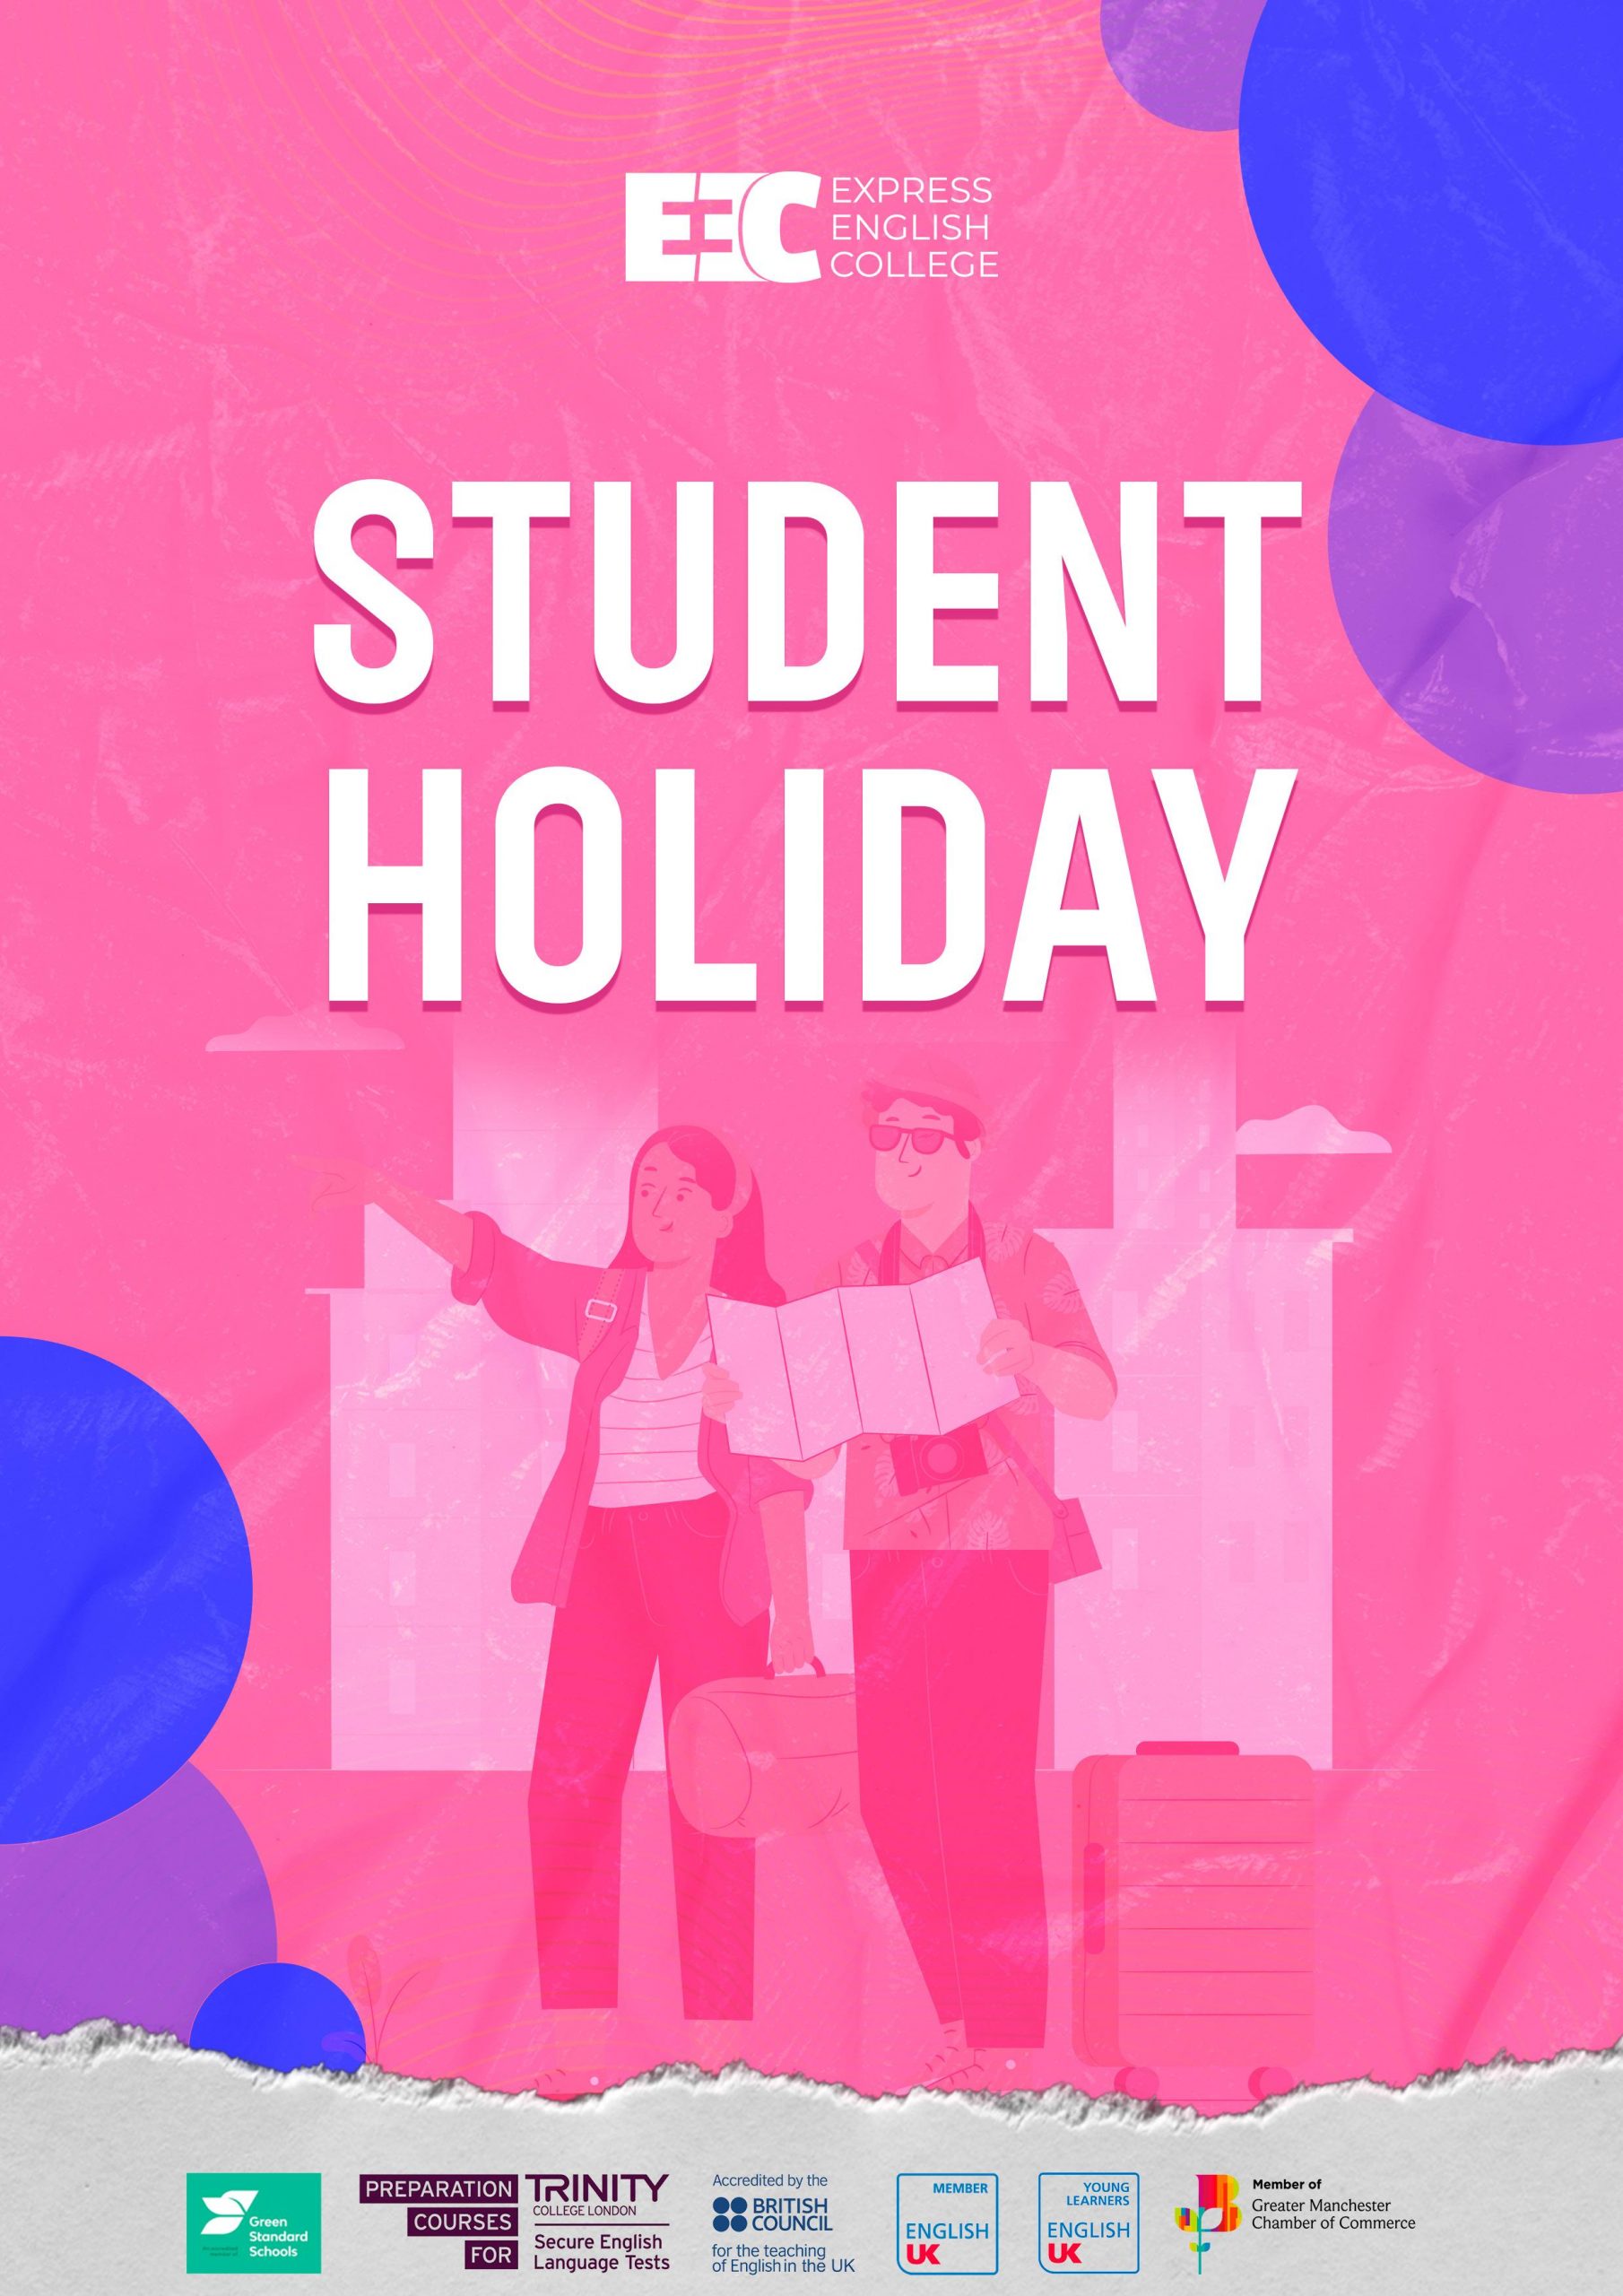 Student Holiday Request Form